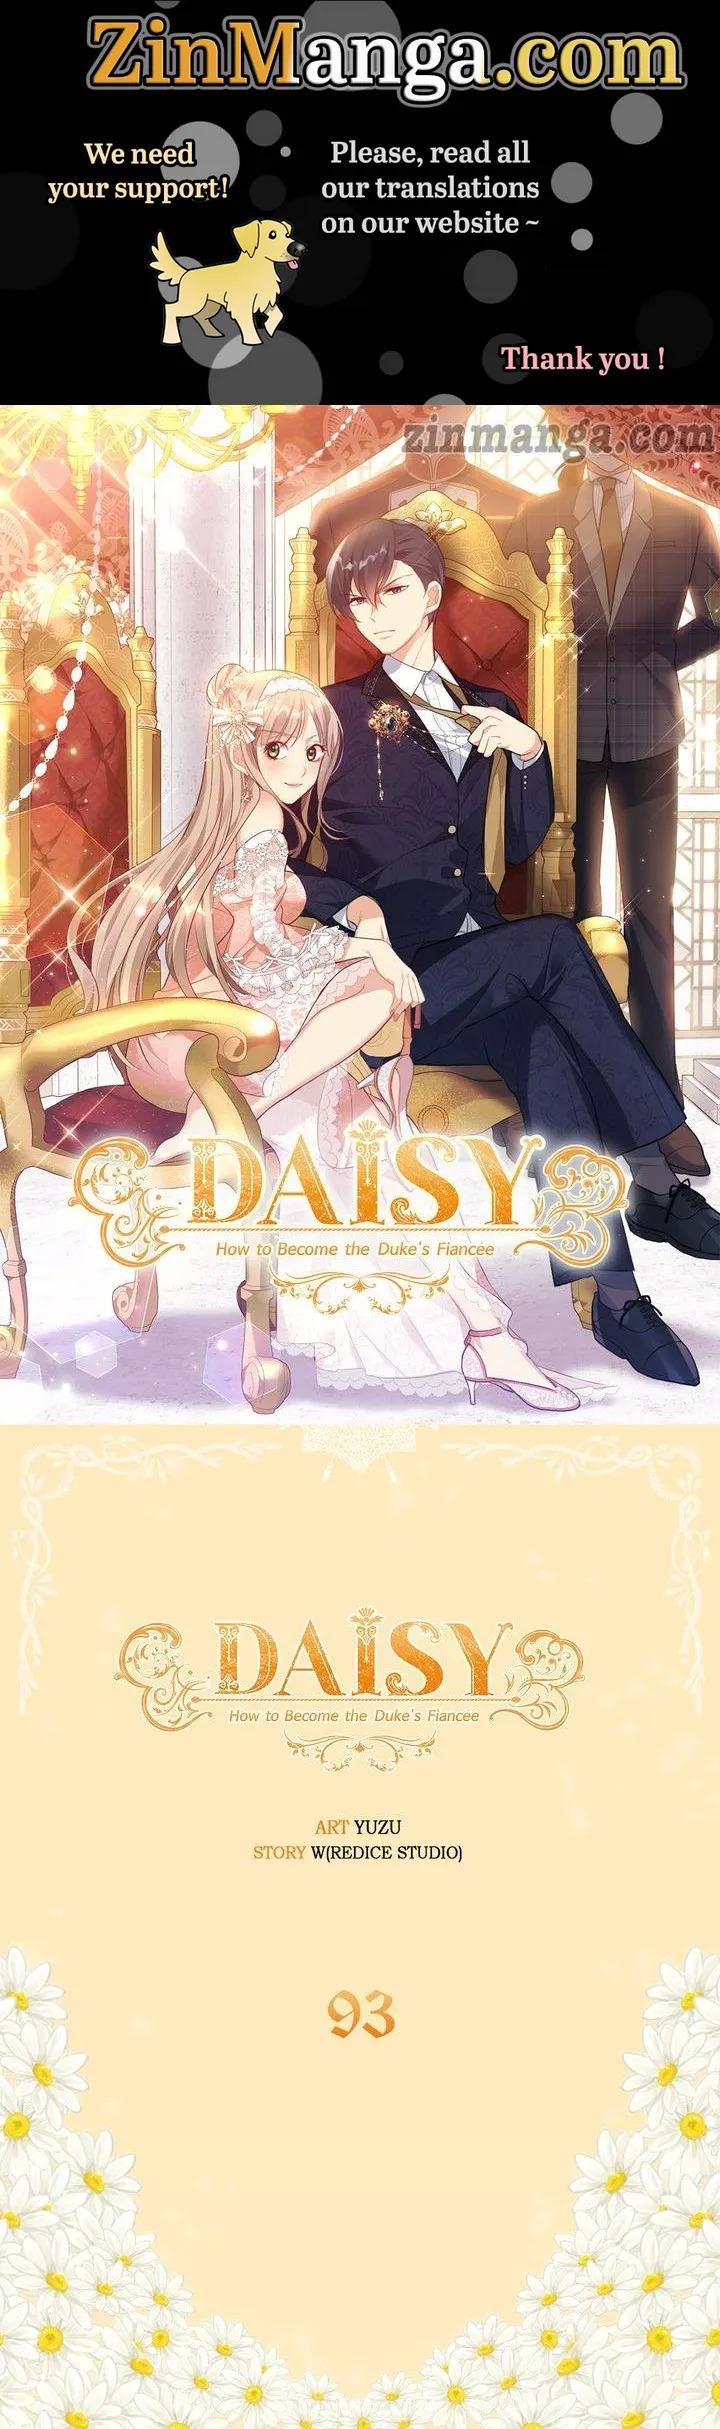 Daisy: How To Become The Duke’s Fiancée Chapter 93